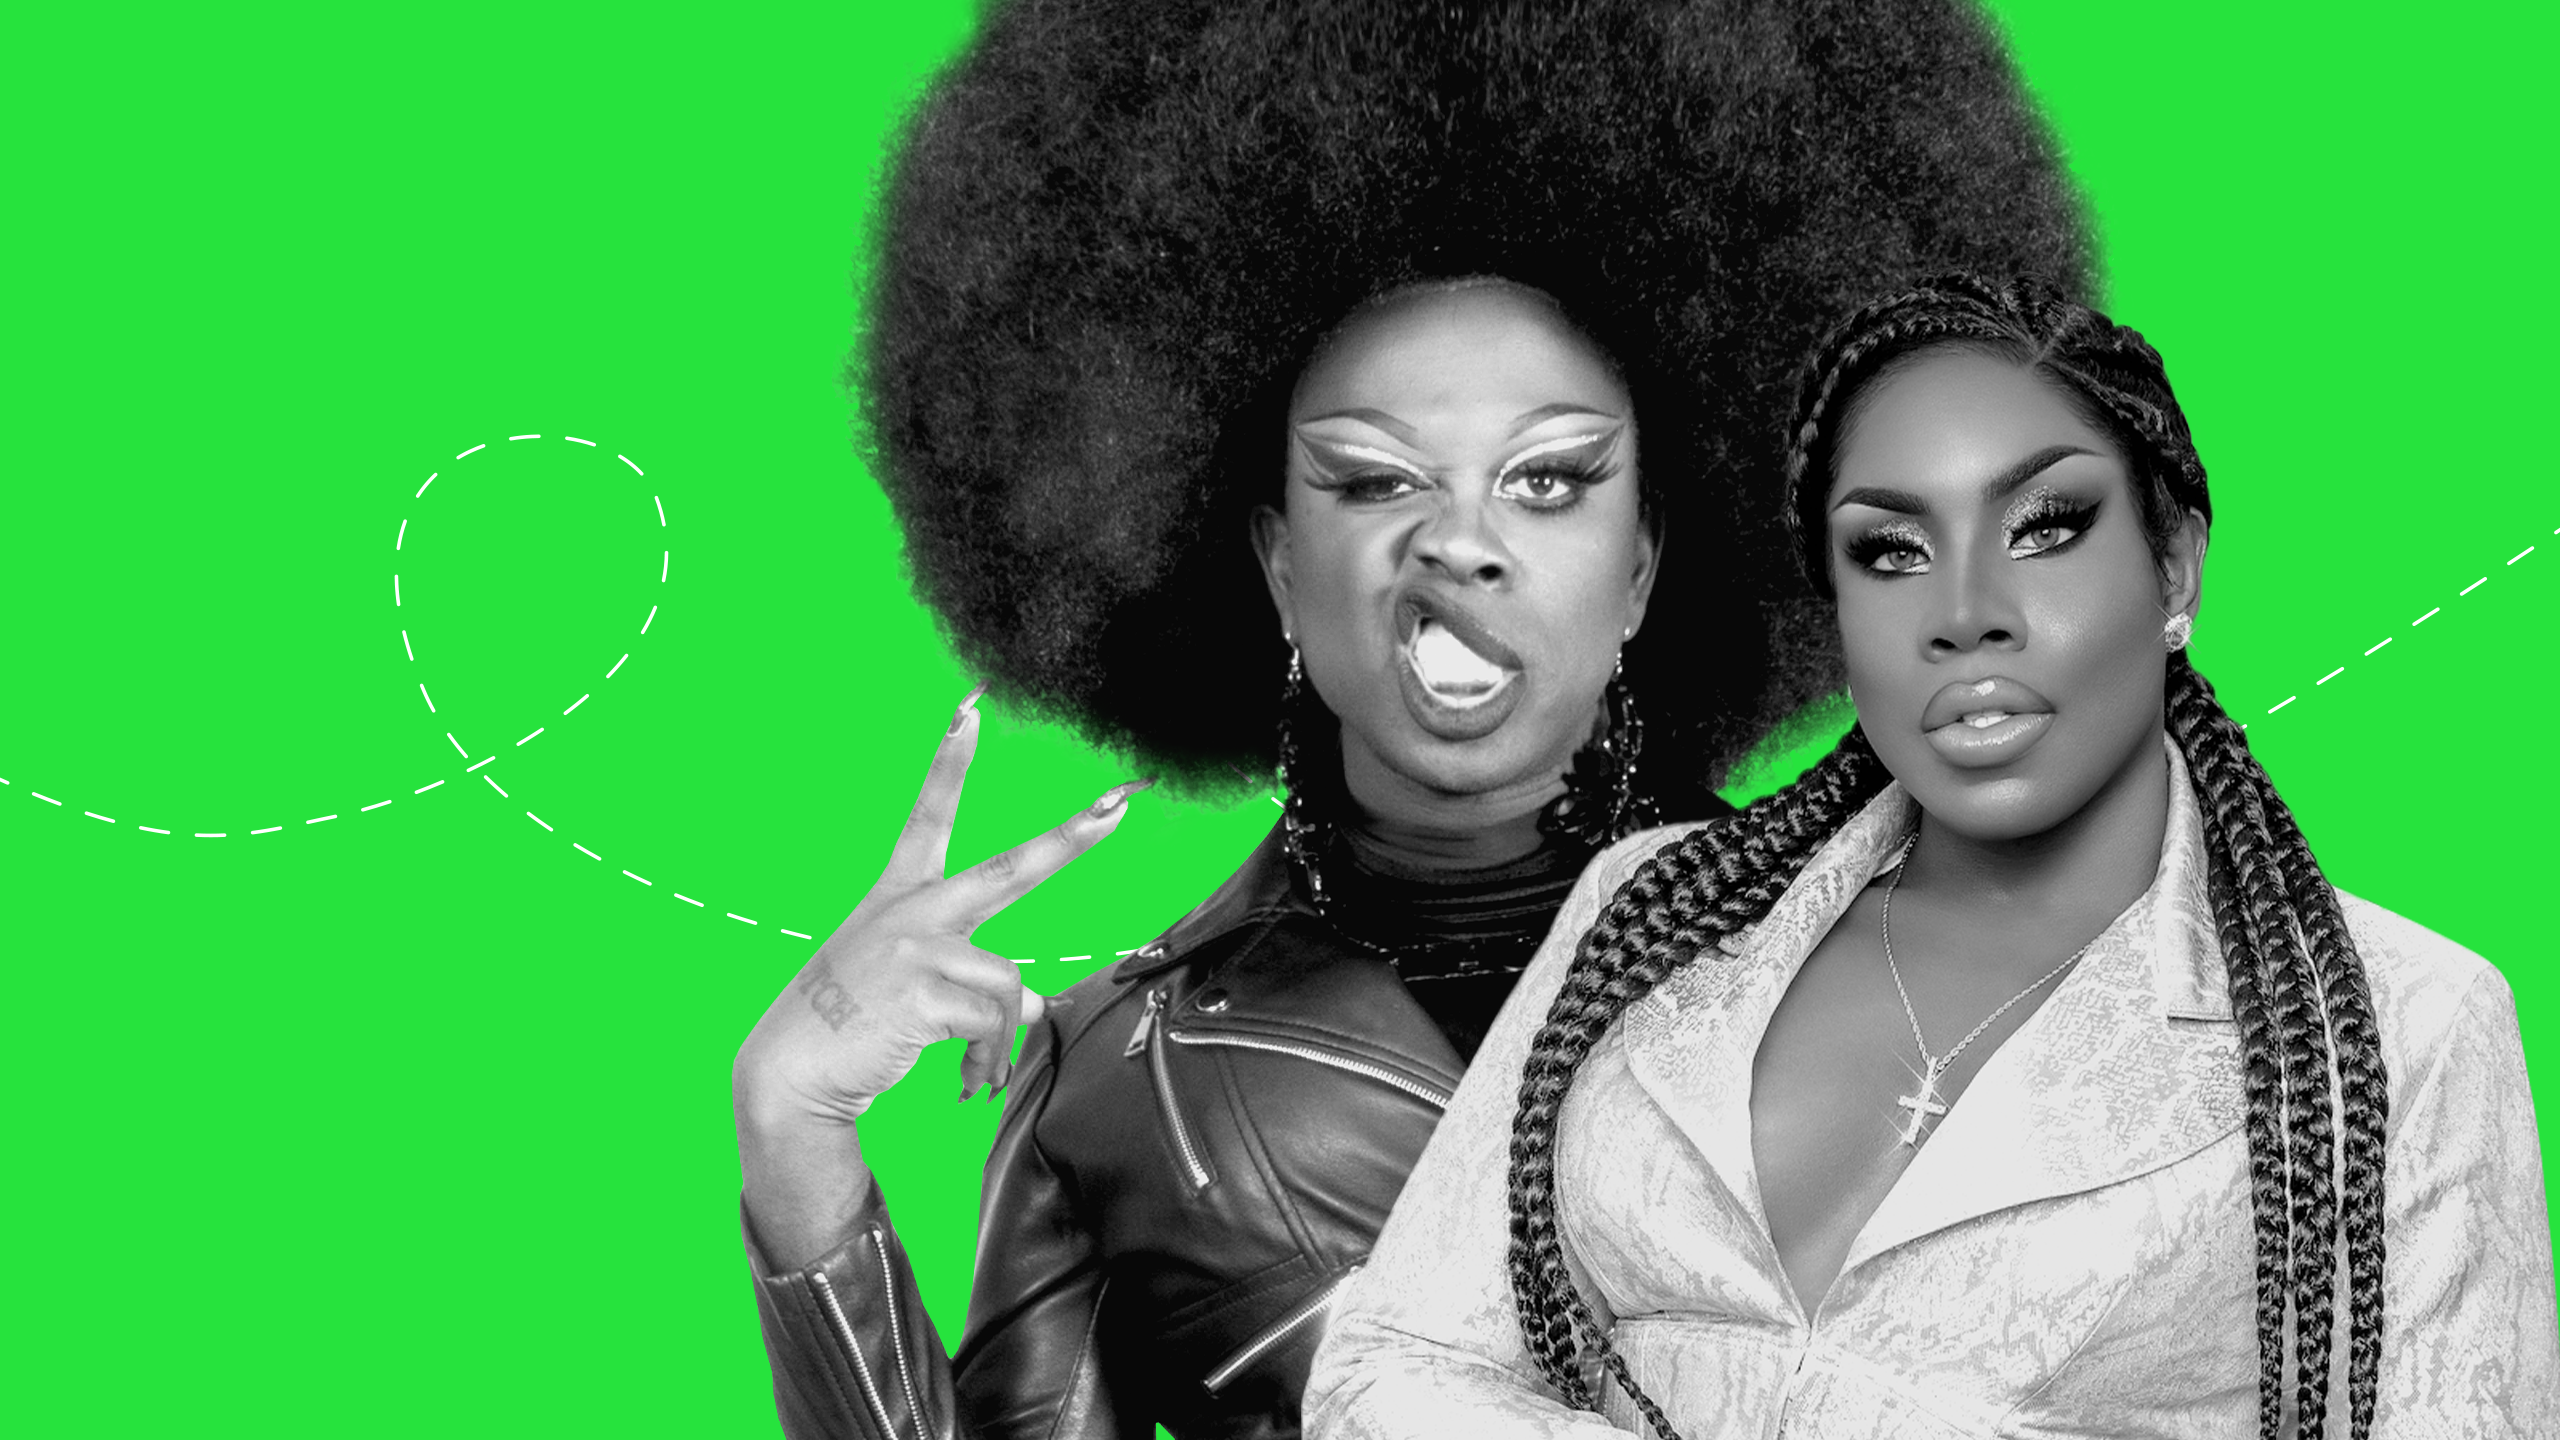 Bob the Drag Queen and Monét X Change